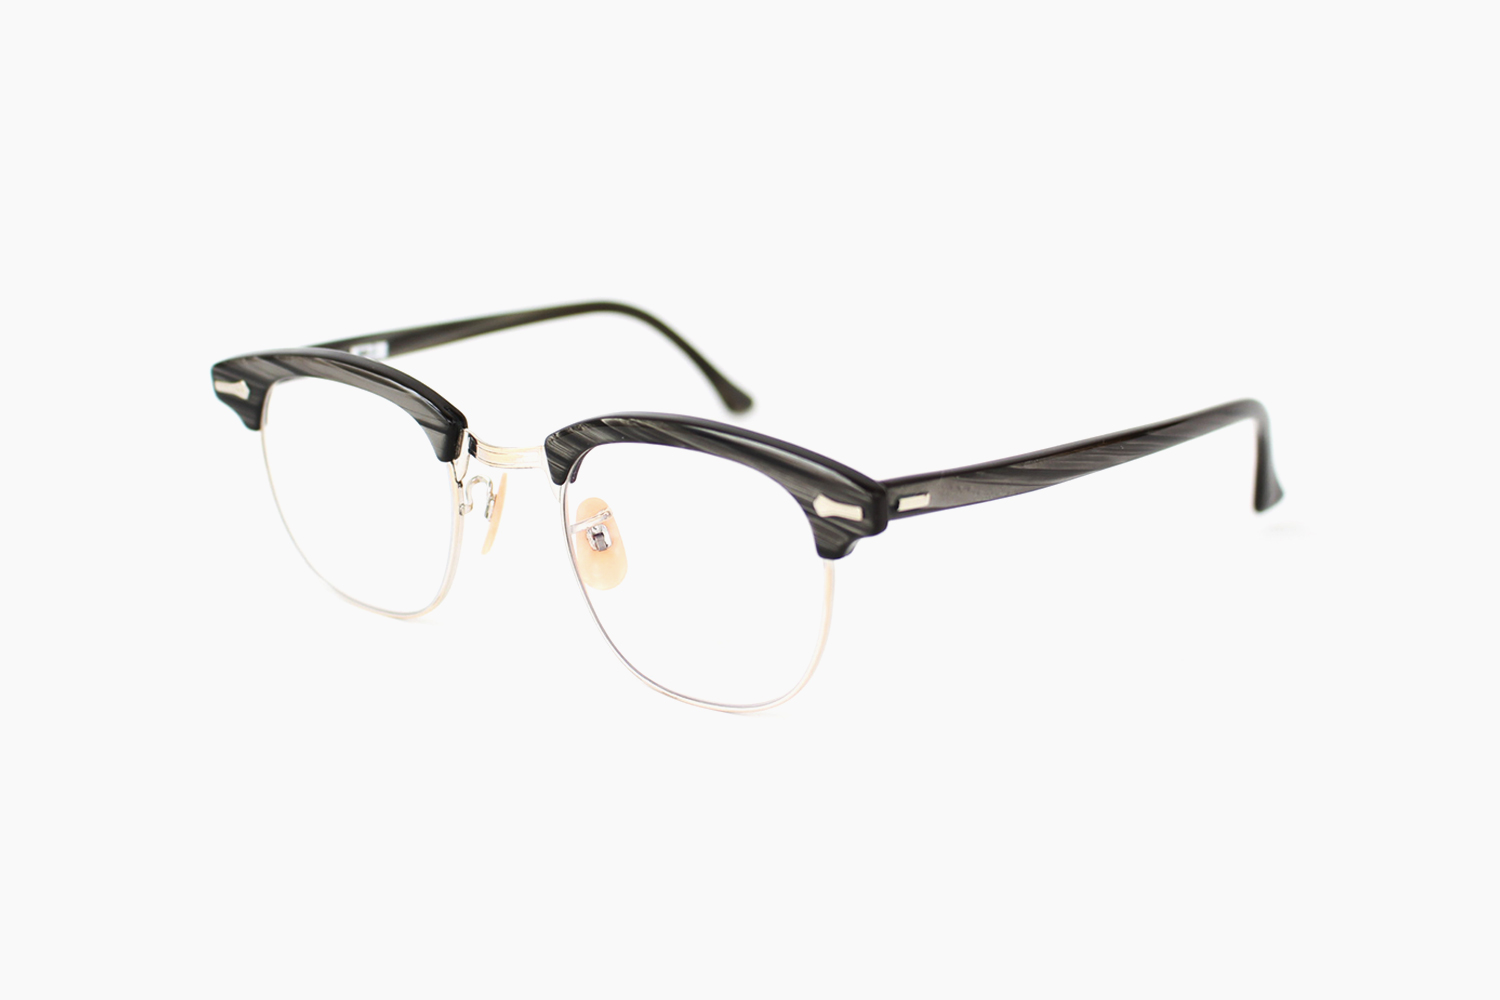 Shuron Optical Company / Combination - GrySt-WG｜The Spectacle